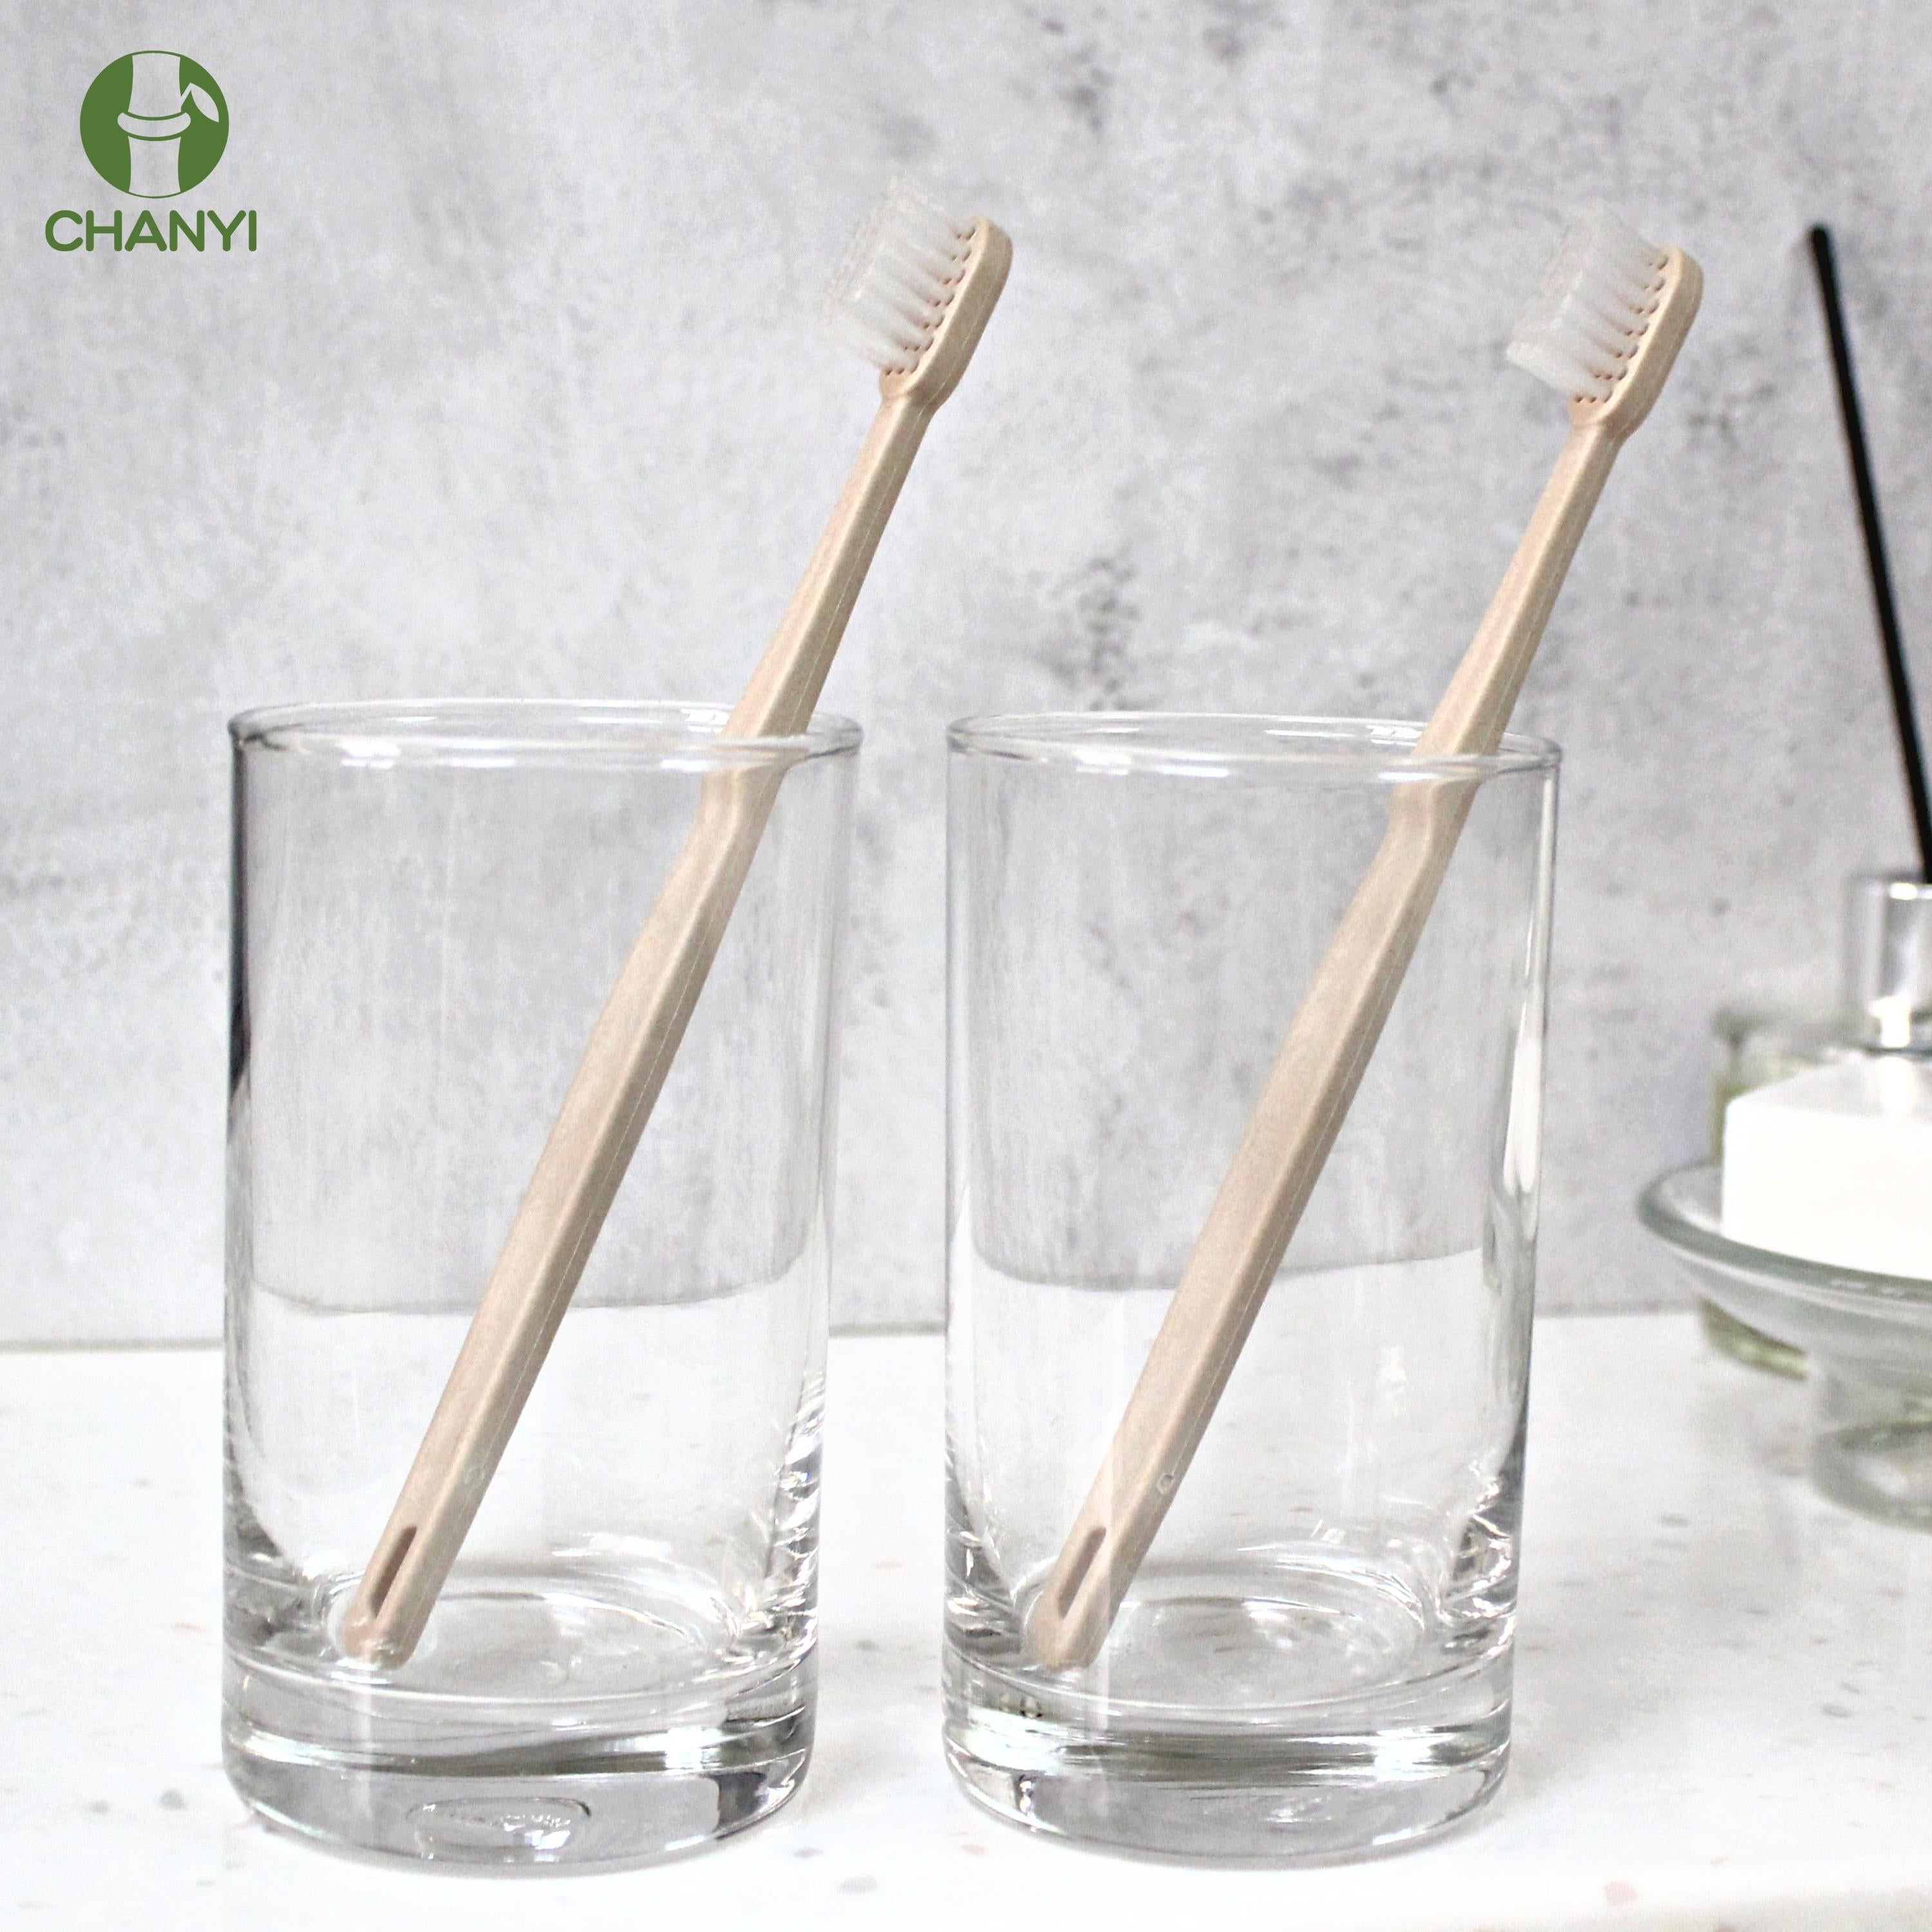 medium bamboo toothbrush soft bristles natural bpa-free eco-friendly compostable sustainable recyclable green manual travel hotel toothbrushes health - CHANYI eco